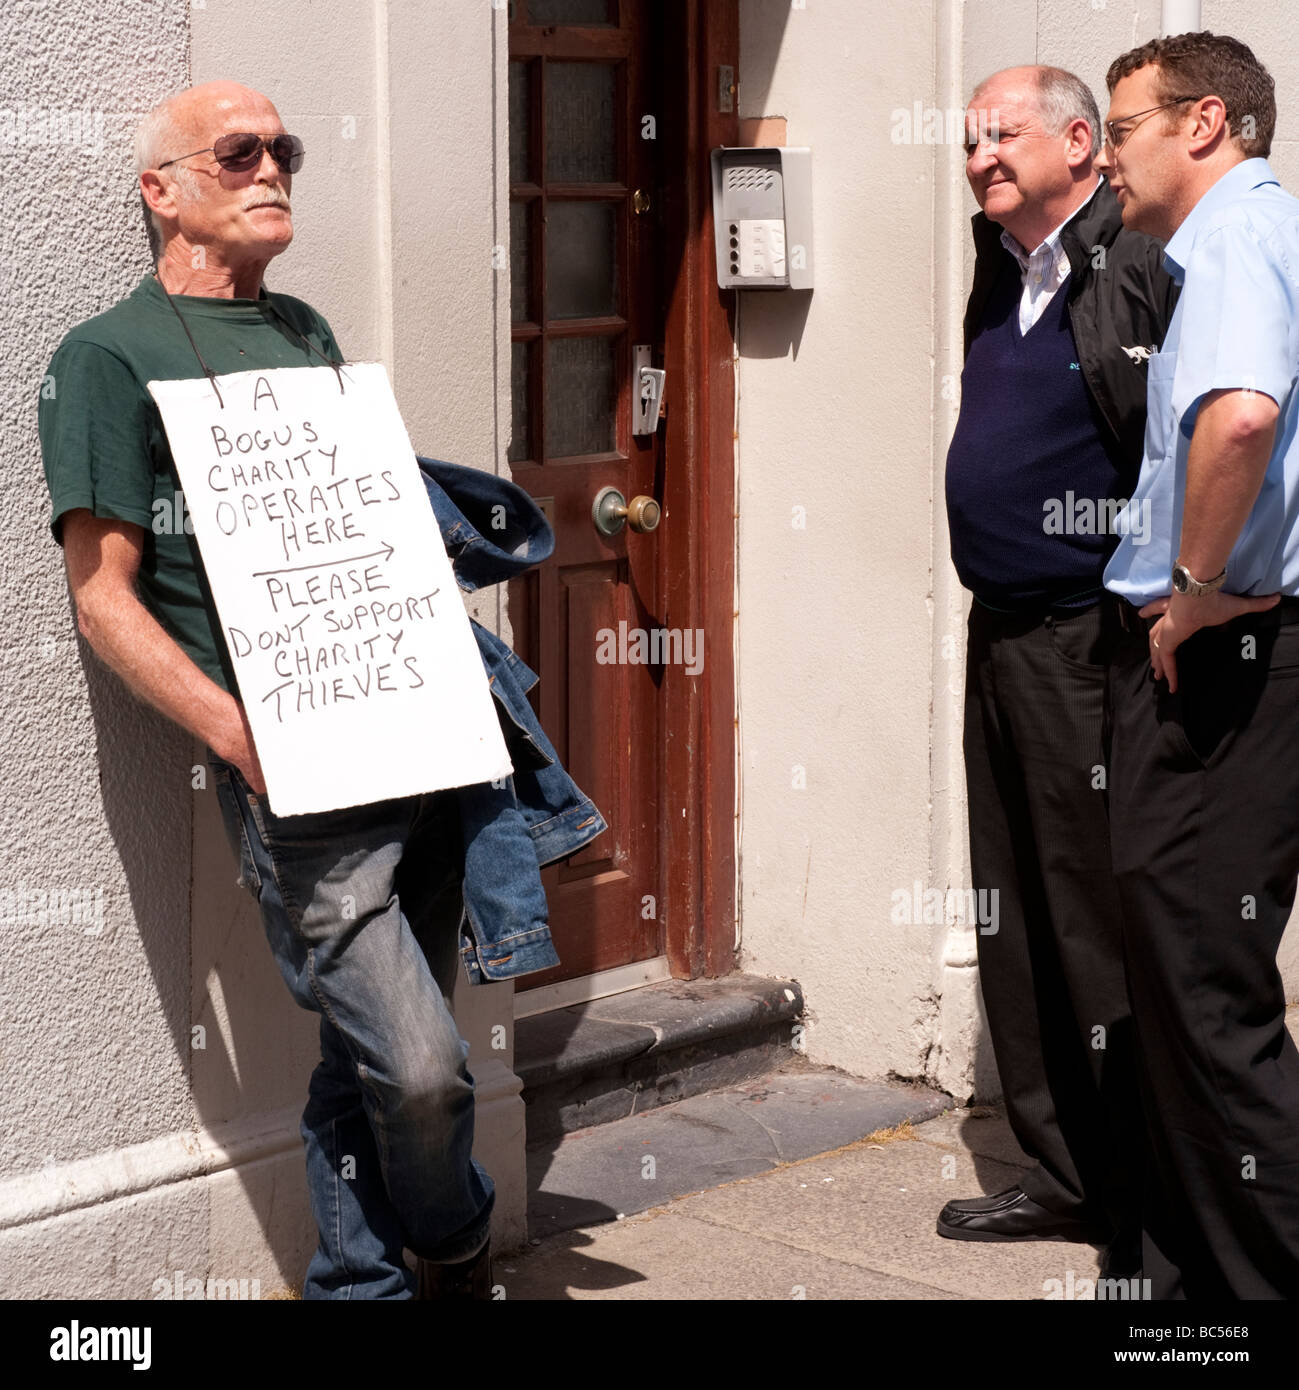 One Man protesting against a local charity Aberystwyth Wales UK Stock Photo